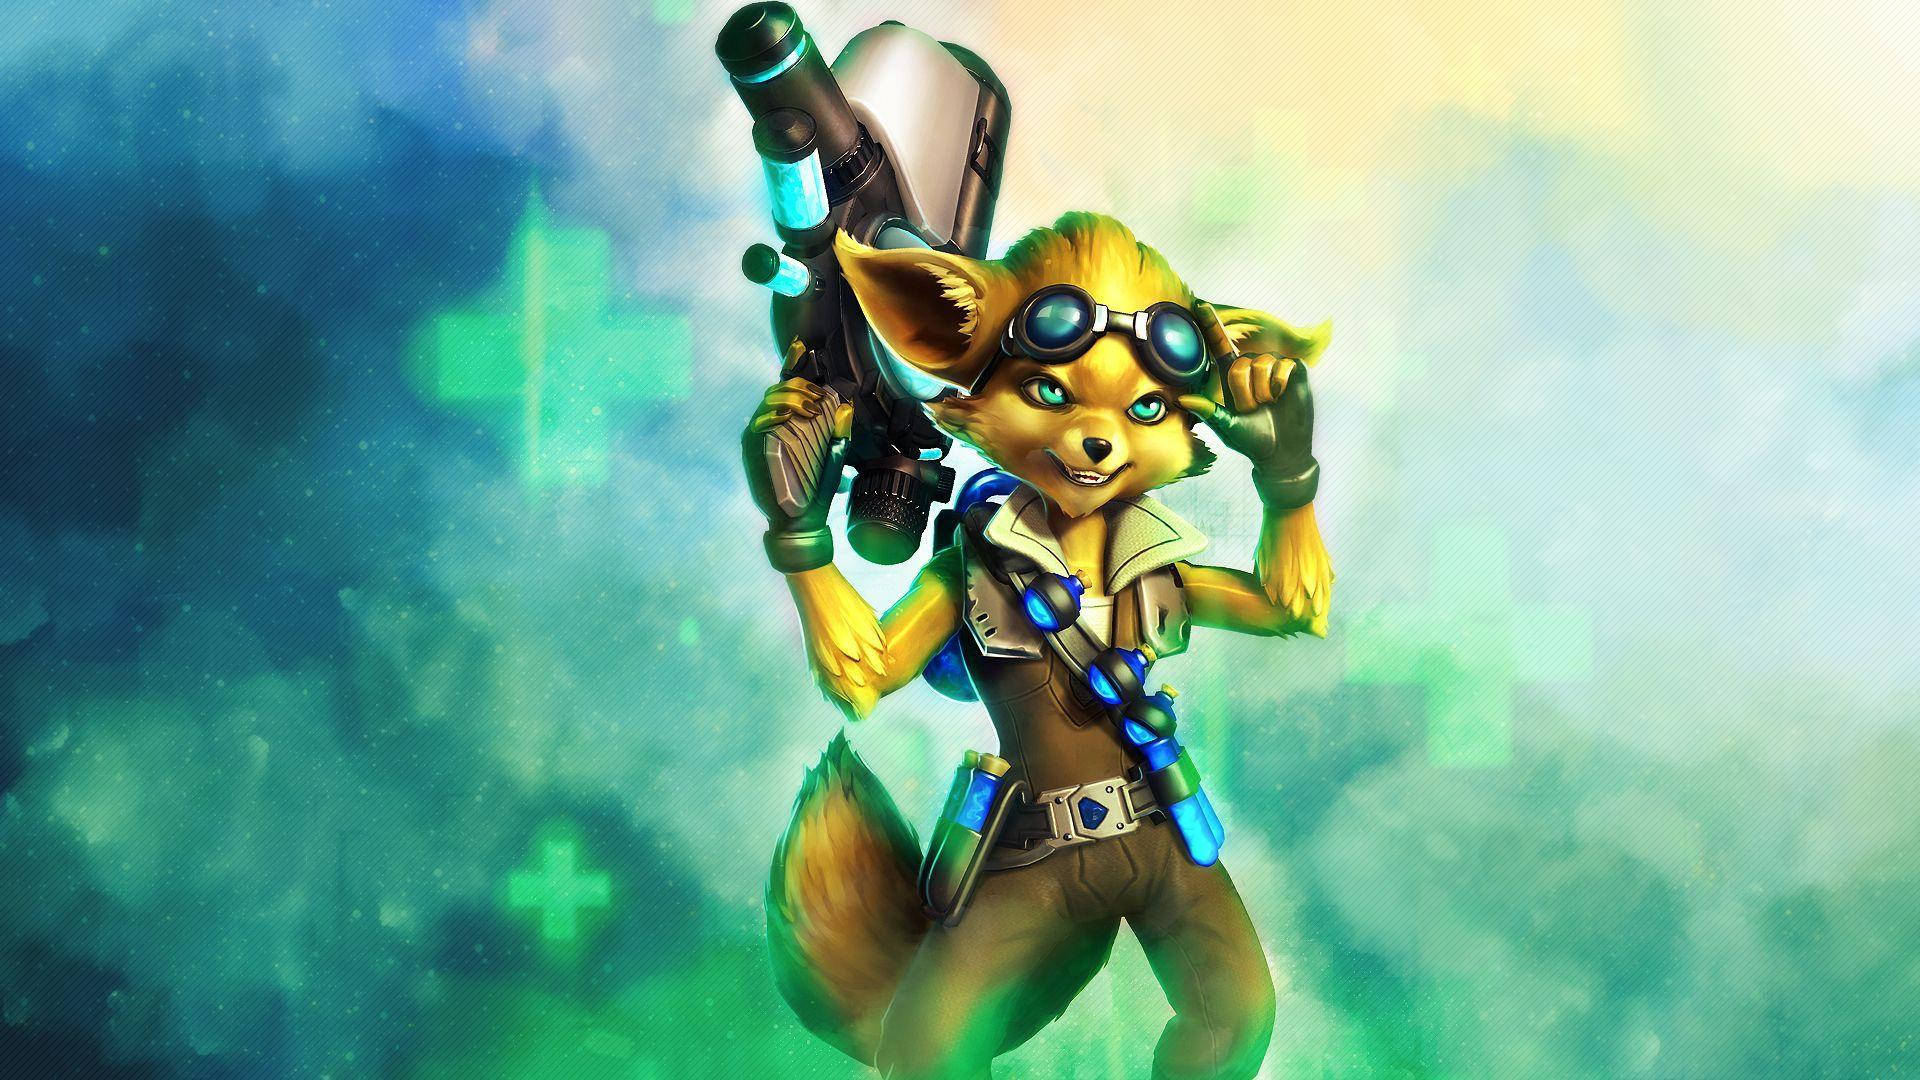 Video Game Paladins Champion Pip Posing With Launcher Wallpaper